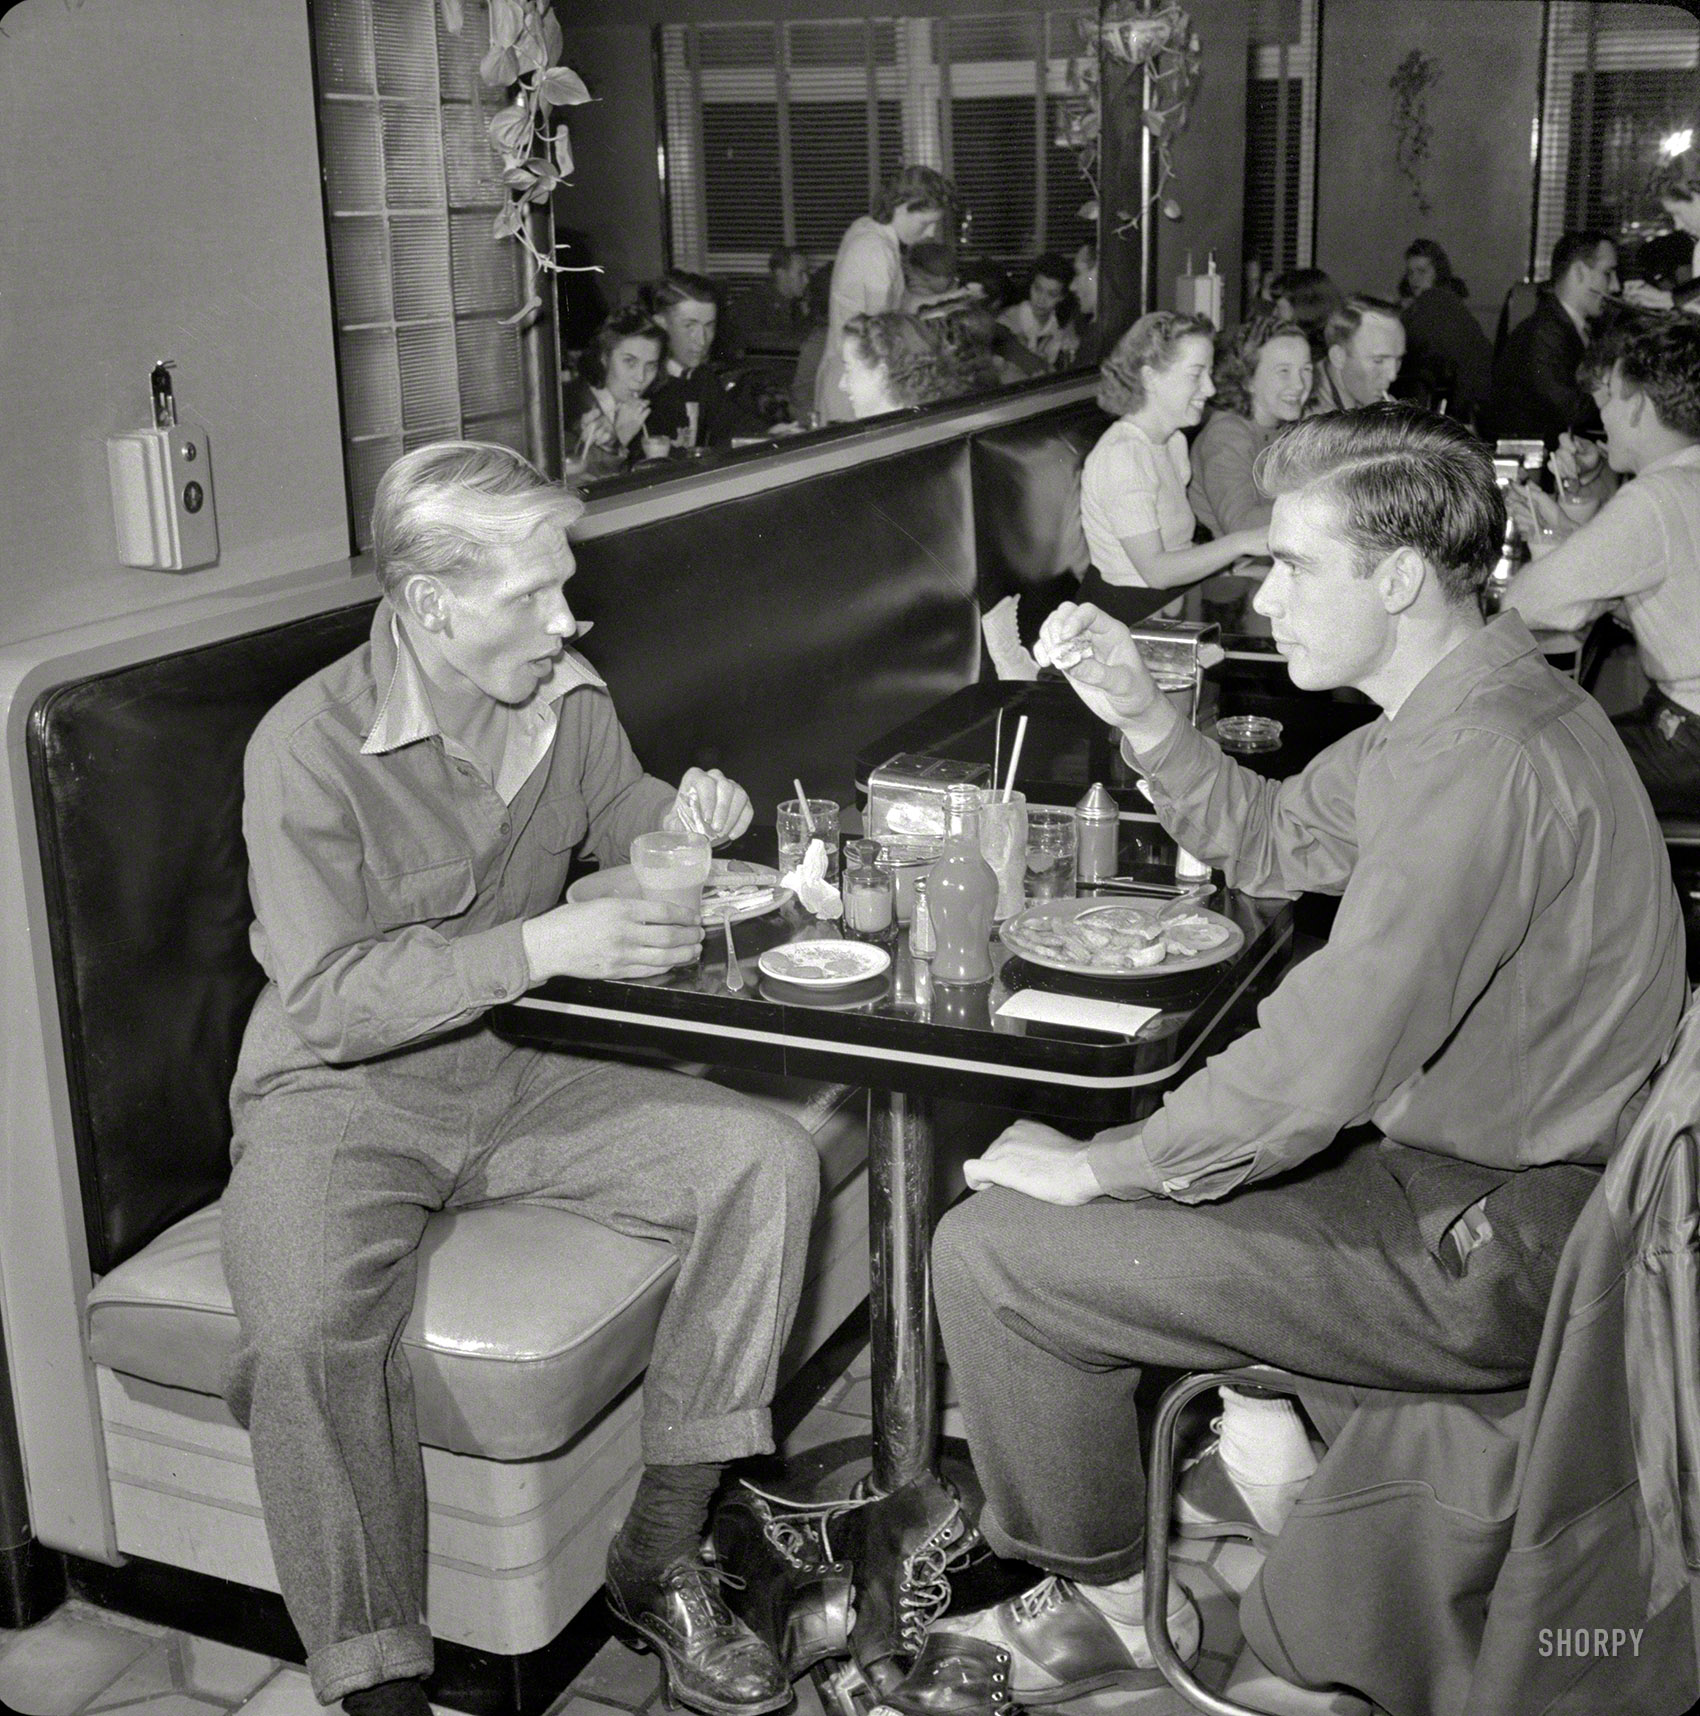 December 1941. Washington, D.C. "Diners in Washington Hot Shoppes restaurant." An exciting night of ice skating awaits, or has just concluded. Medium format nitrate negative by John Collier. View full size.